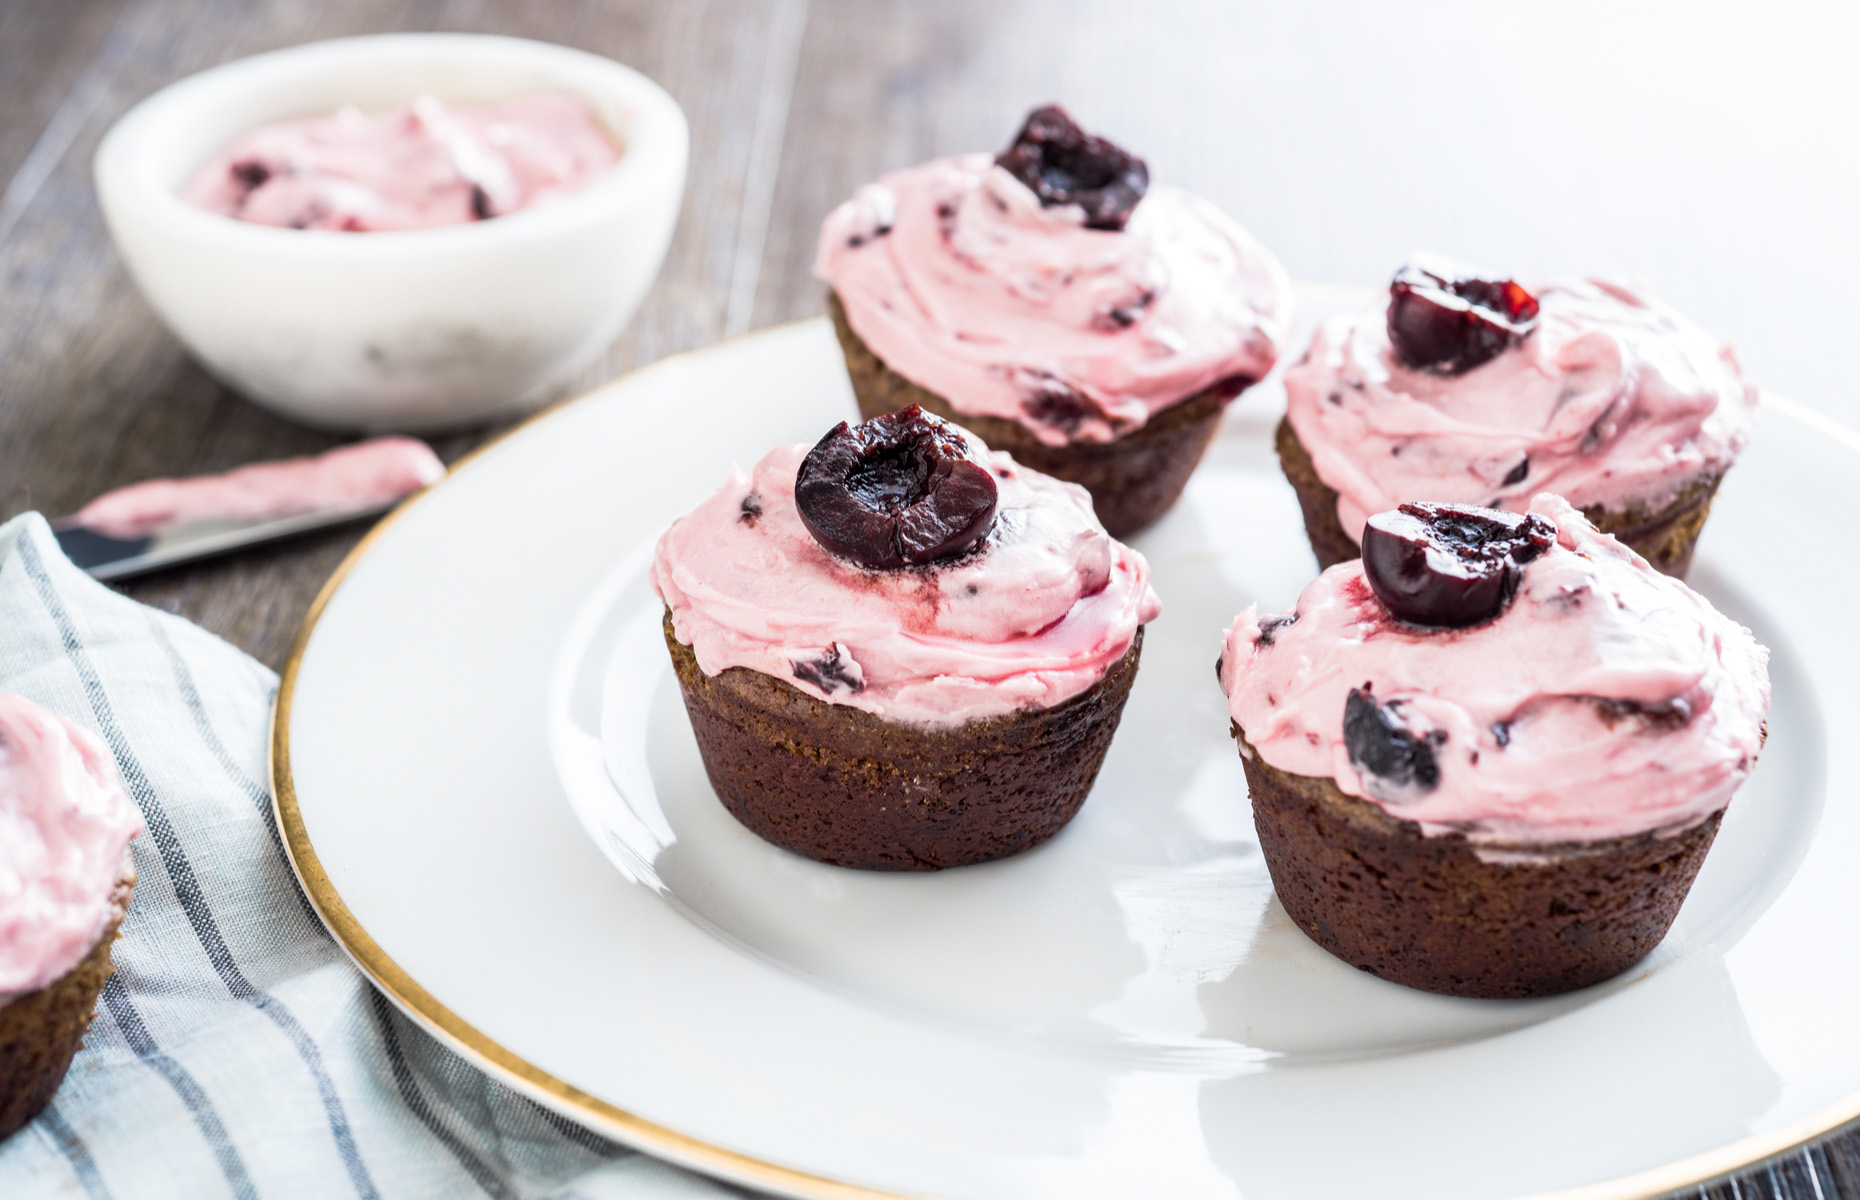 Black Forest cupcakes (Image: Jacob Blount/Shutterstock)